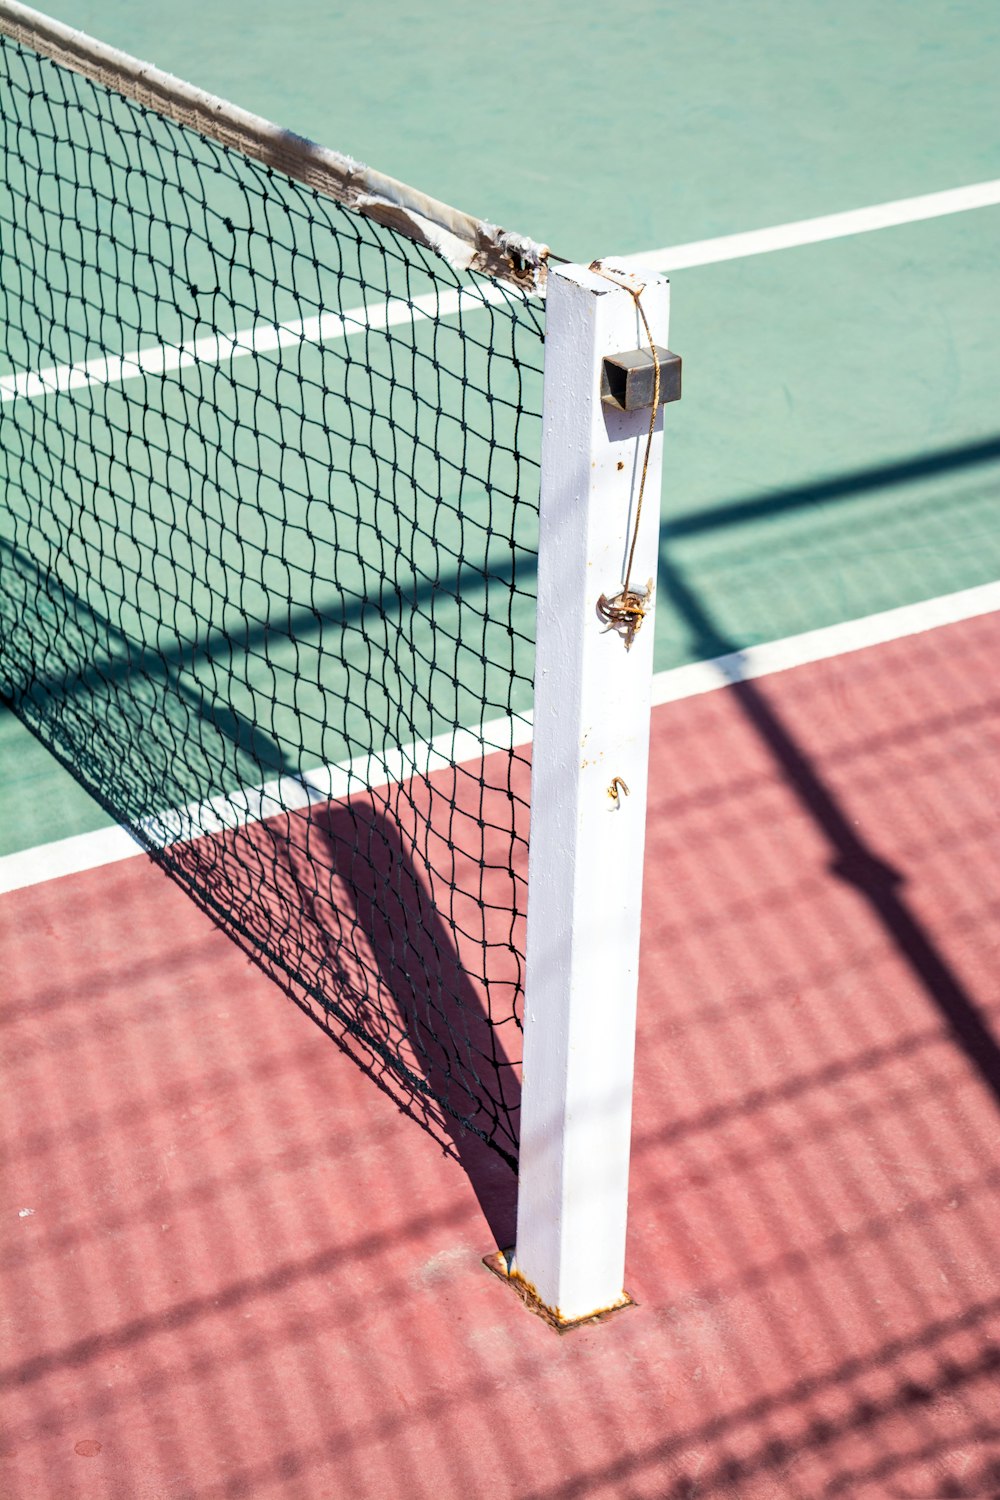 A focused shot of a post on one side of a tennis net.